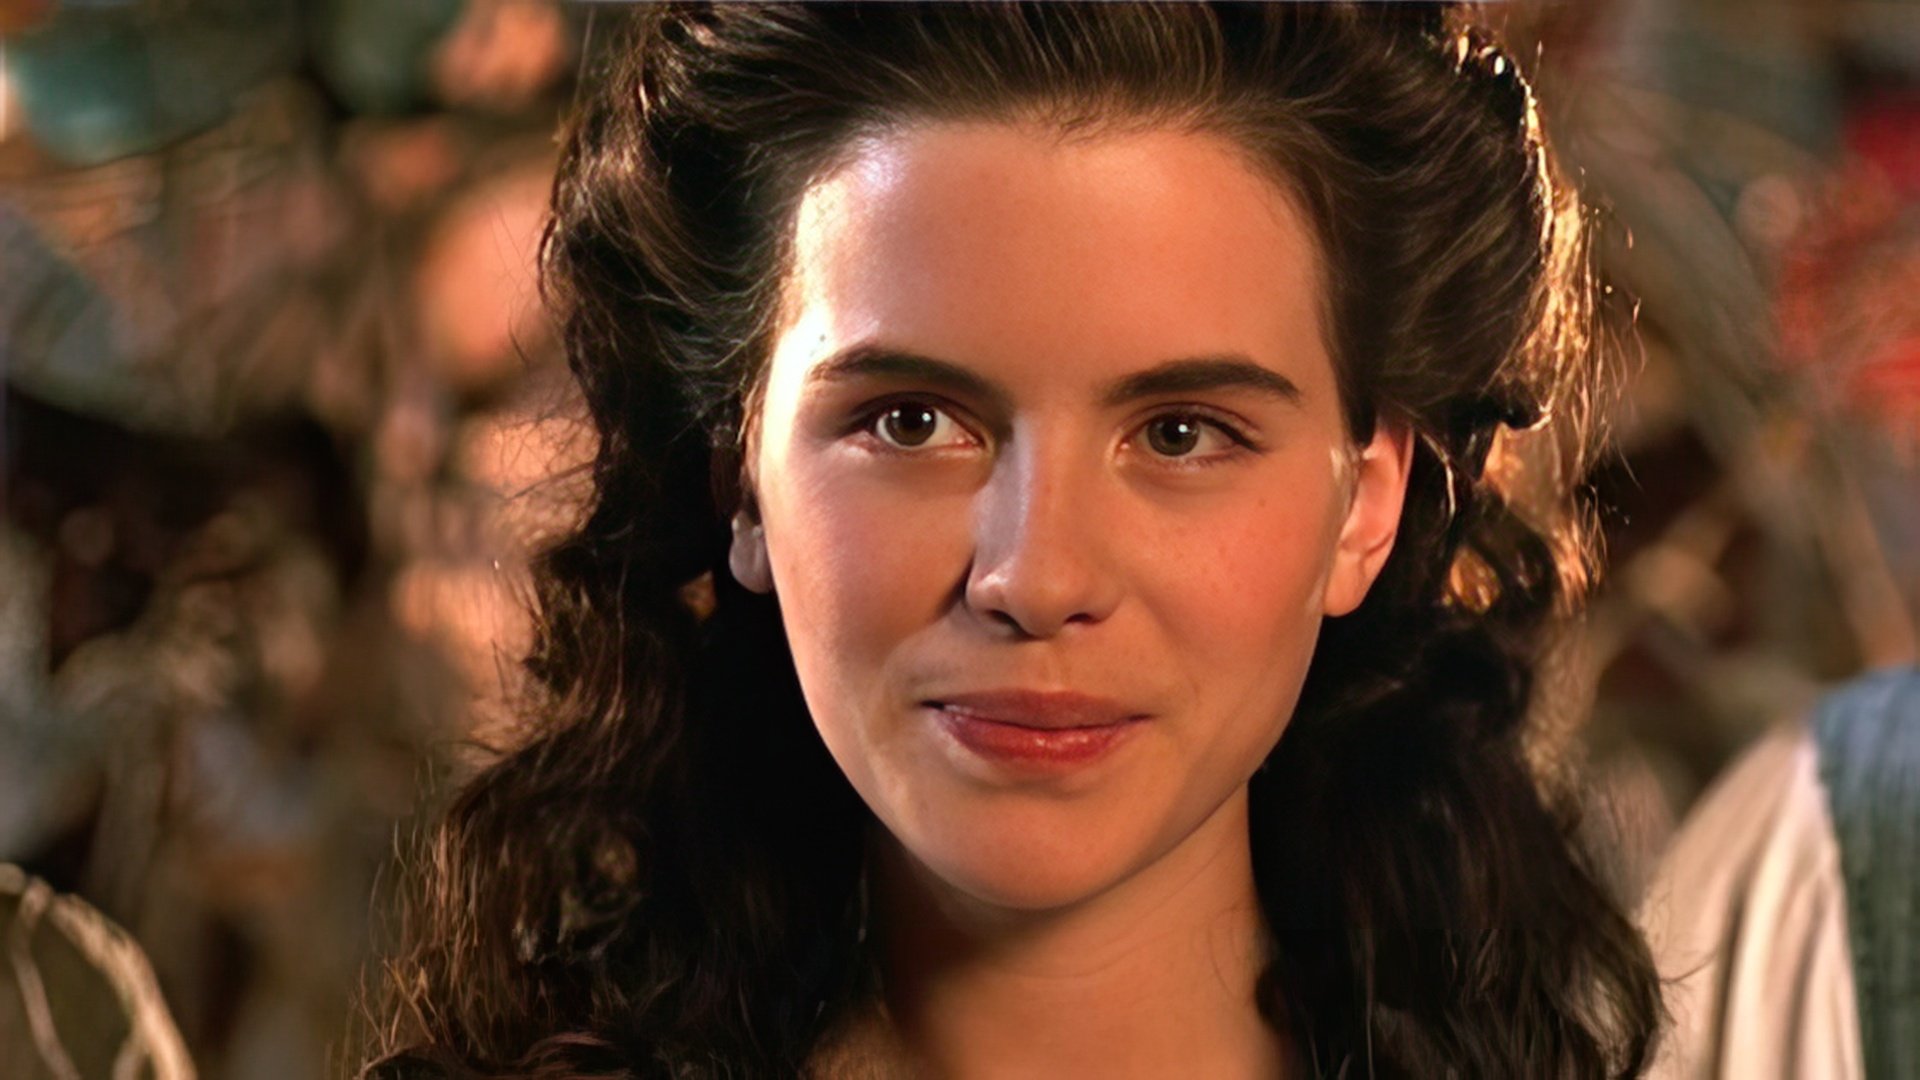 Kate Beckinsale in the movie Much Ado About Nothing